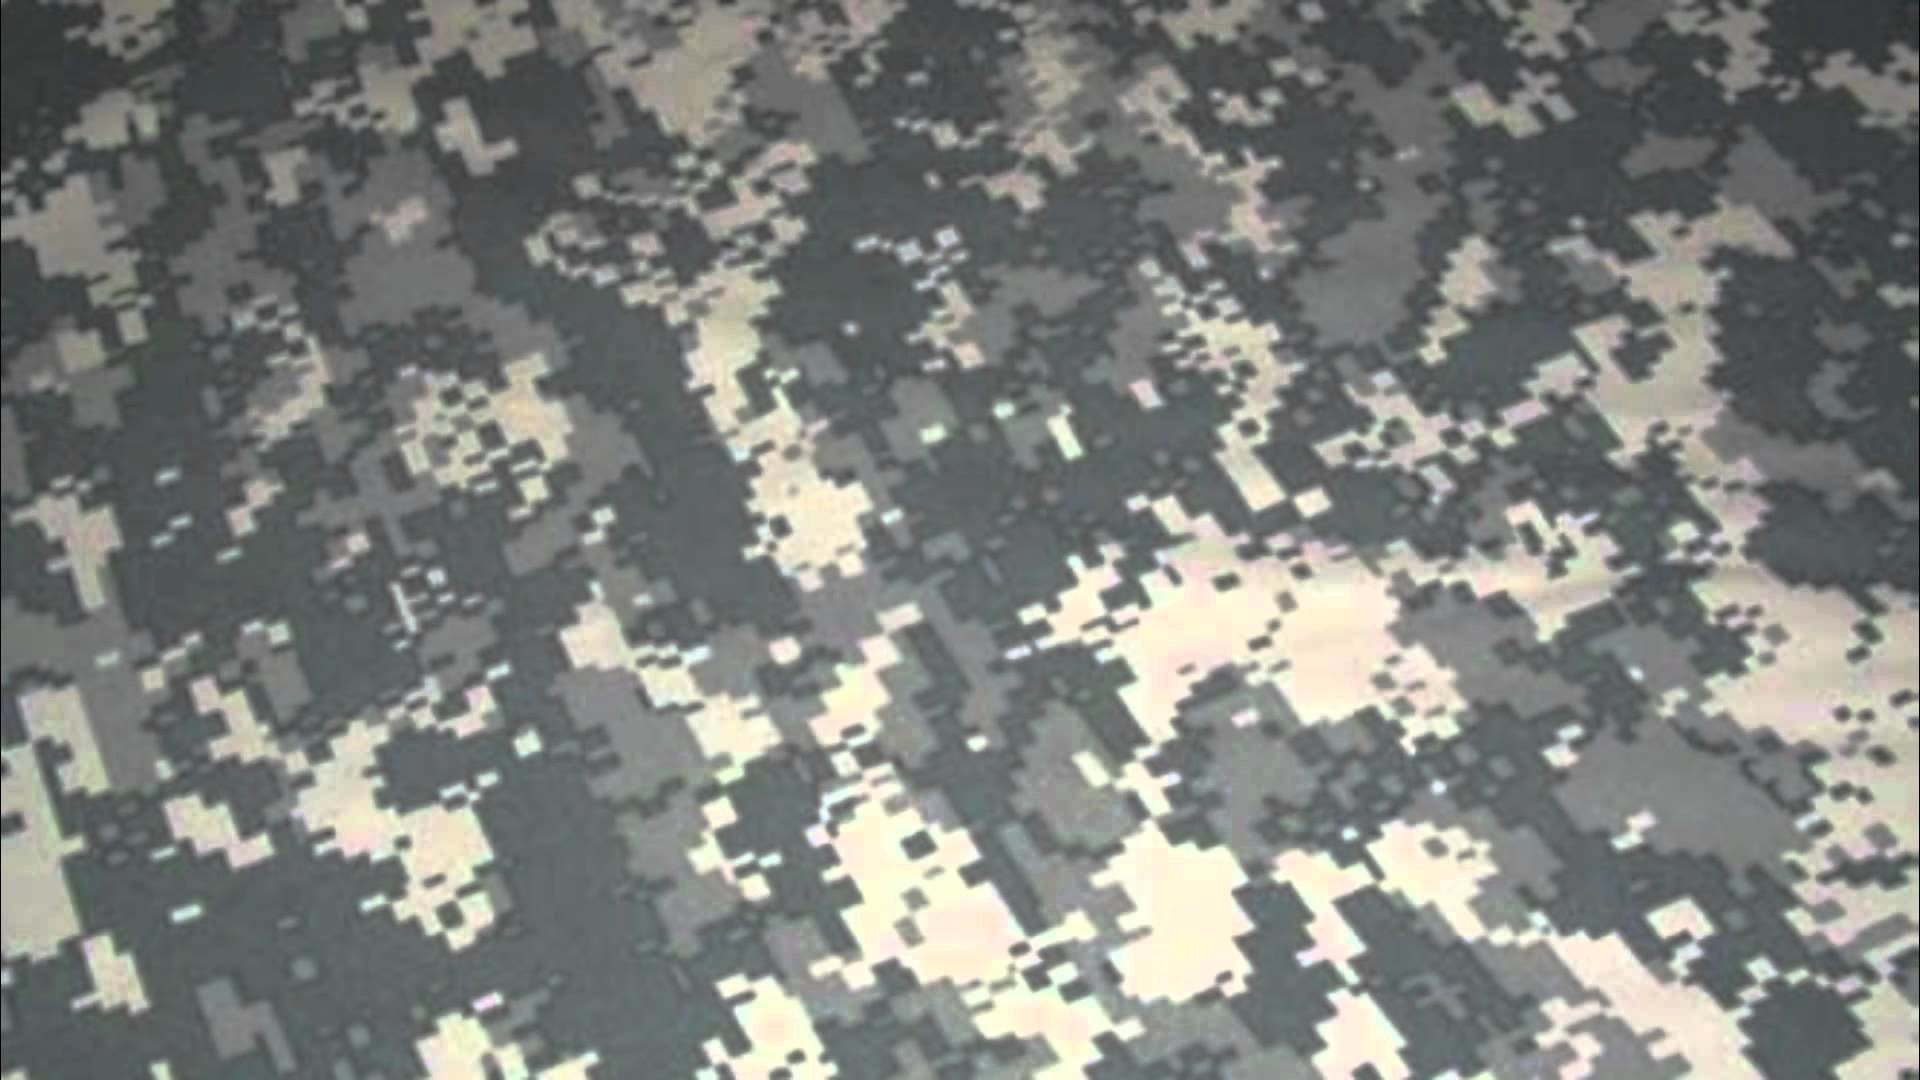 camouflage wallpaper,military camouflage,pattern,camouflage,uniform,design